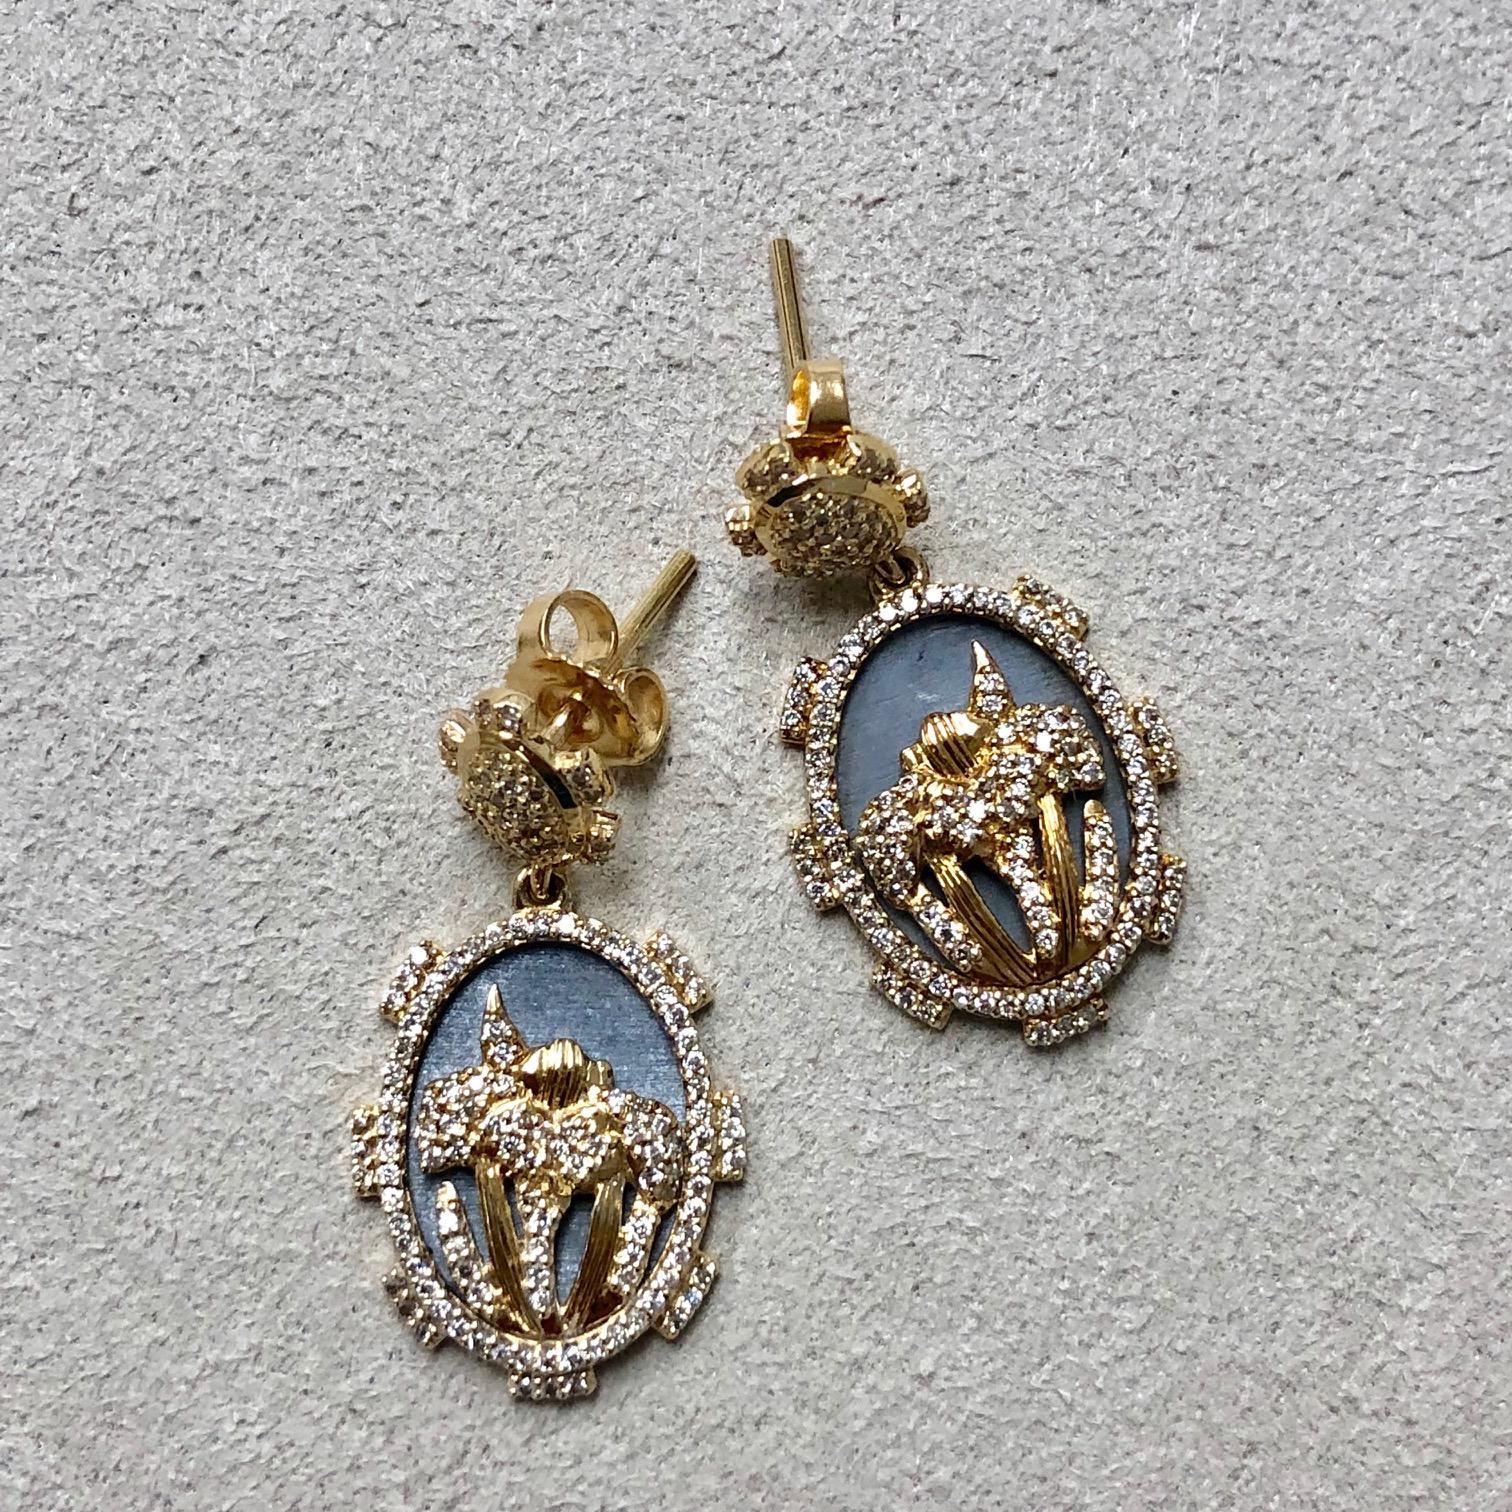 Syna Yellow Gold & Oxidized Silver Iris Flower Earrings with Champagne Diamonds 5